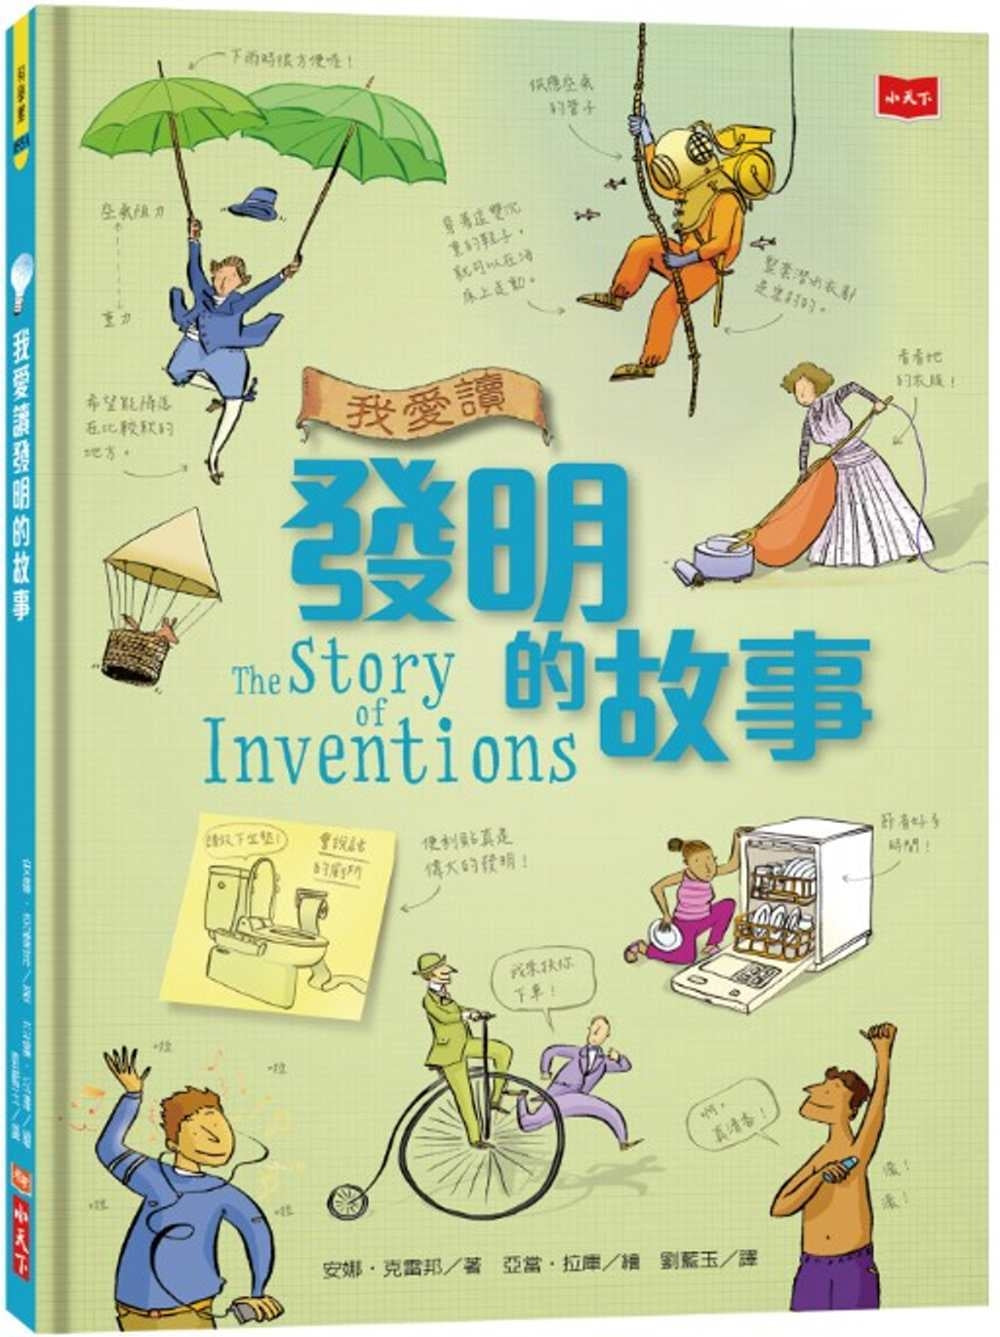 The Story of Inventions我愛讀發明的故事